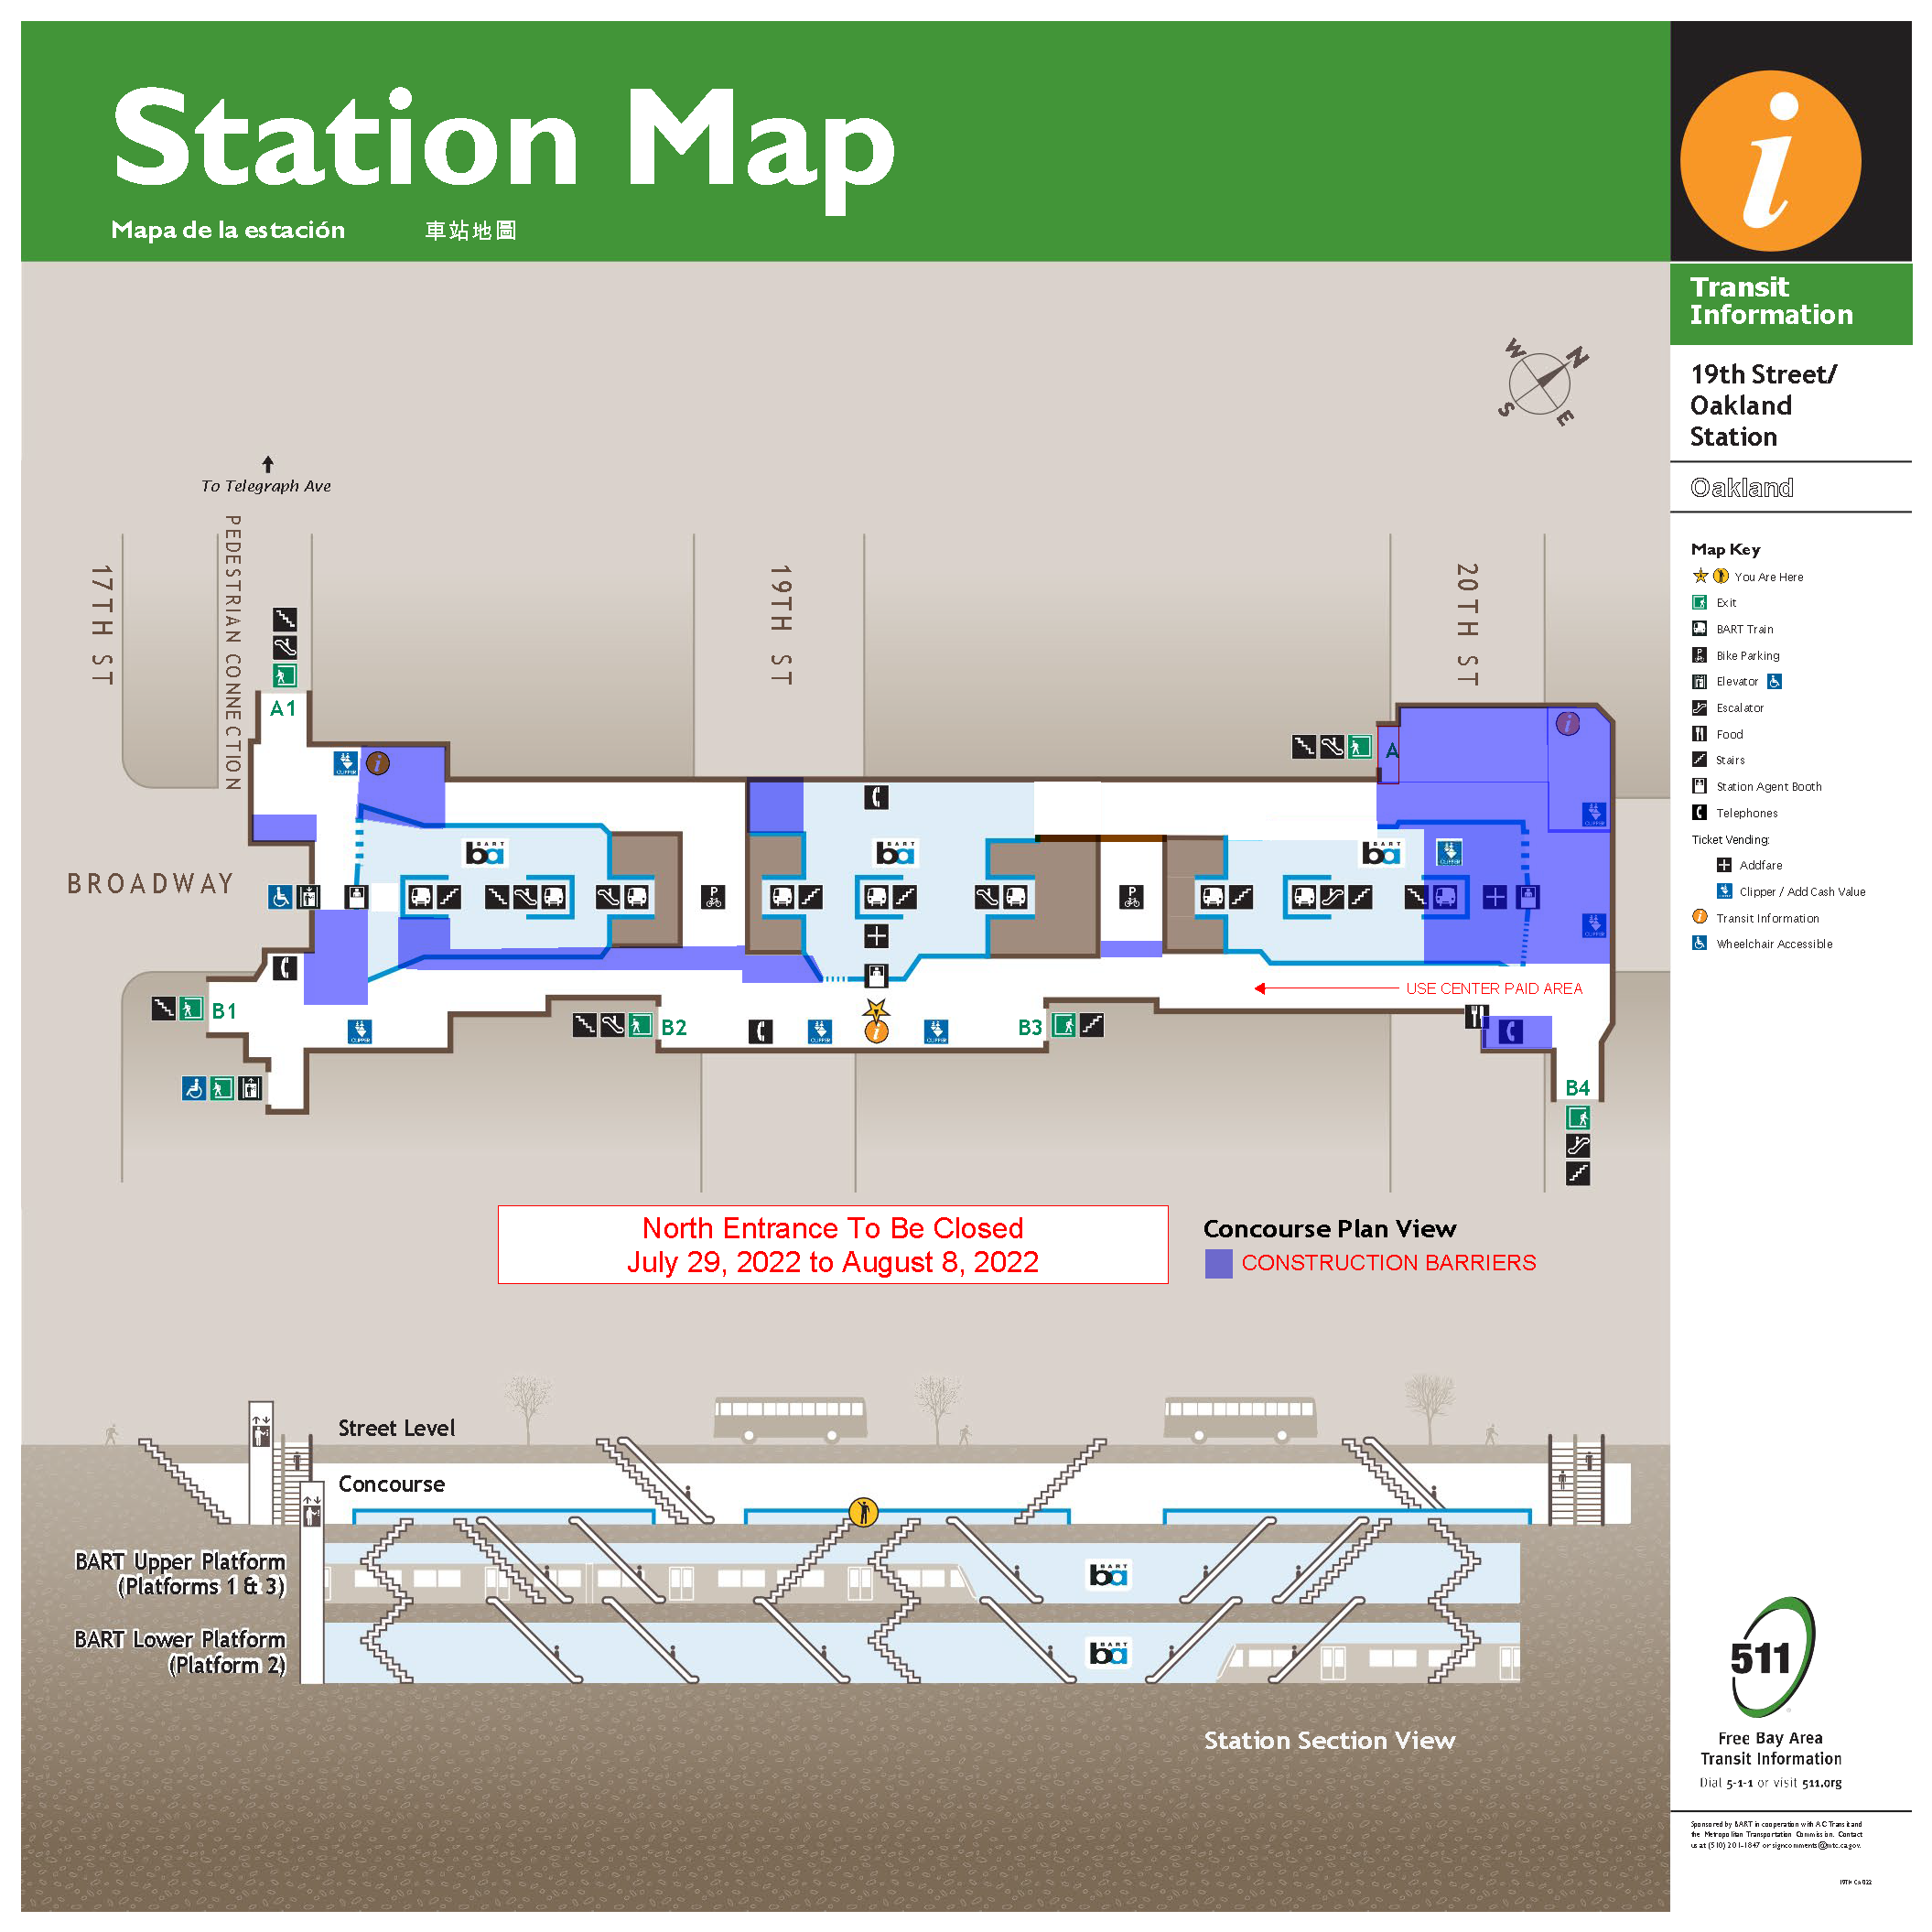 19th St. Oakland station entrance temporarily closing for improvements